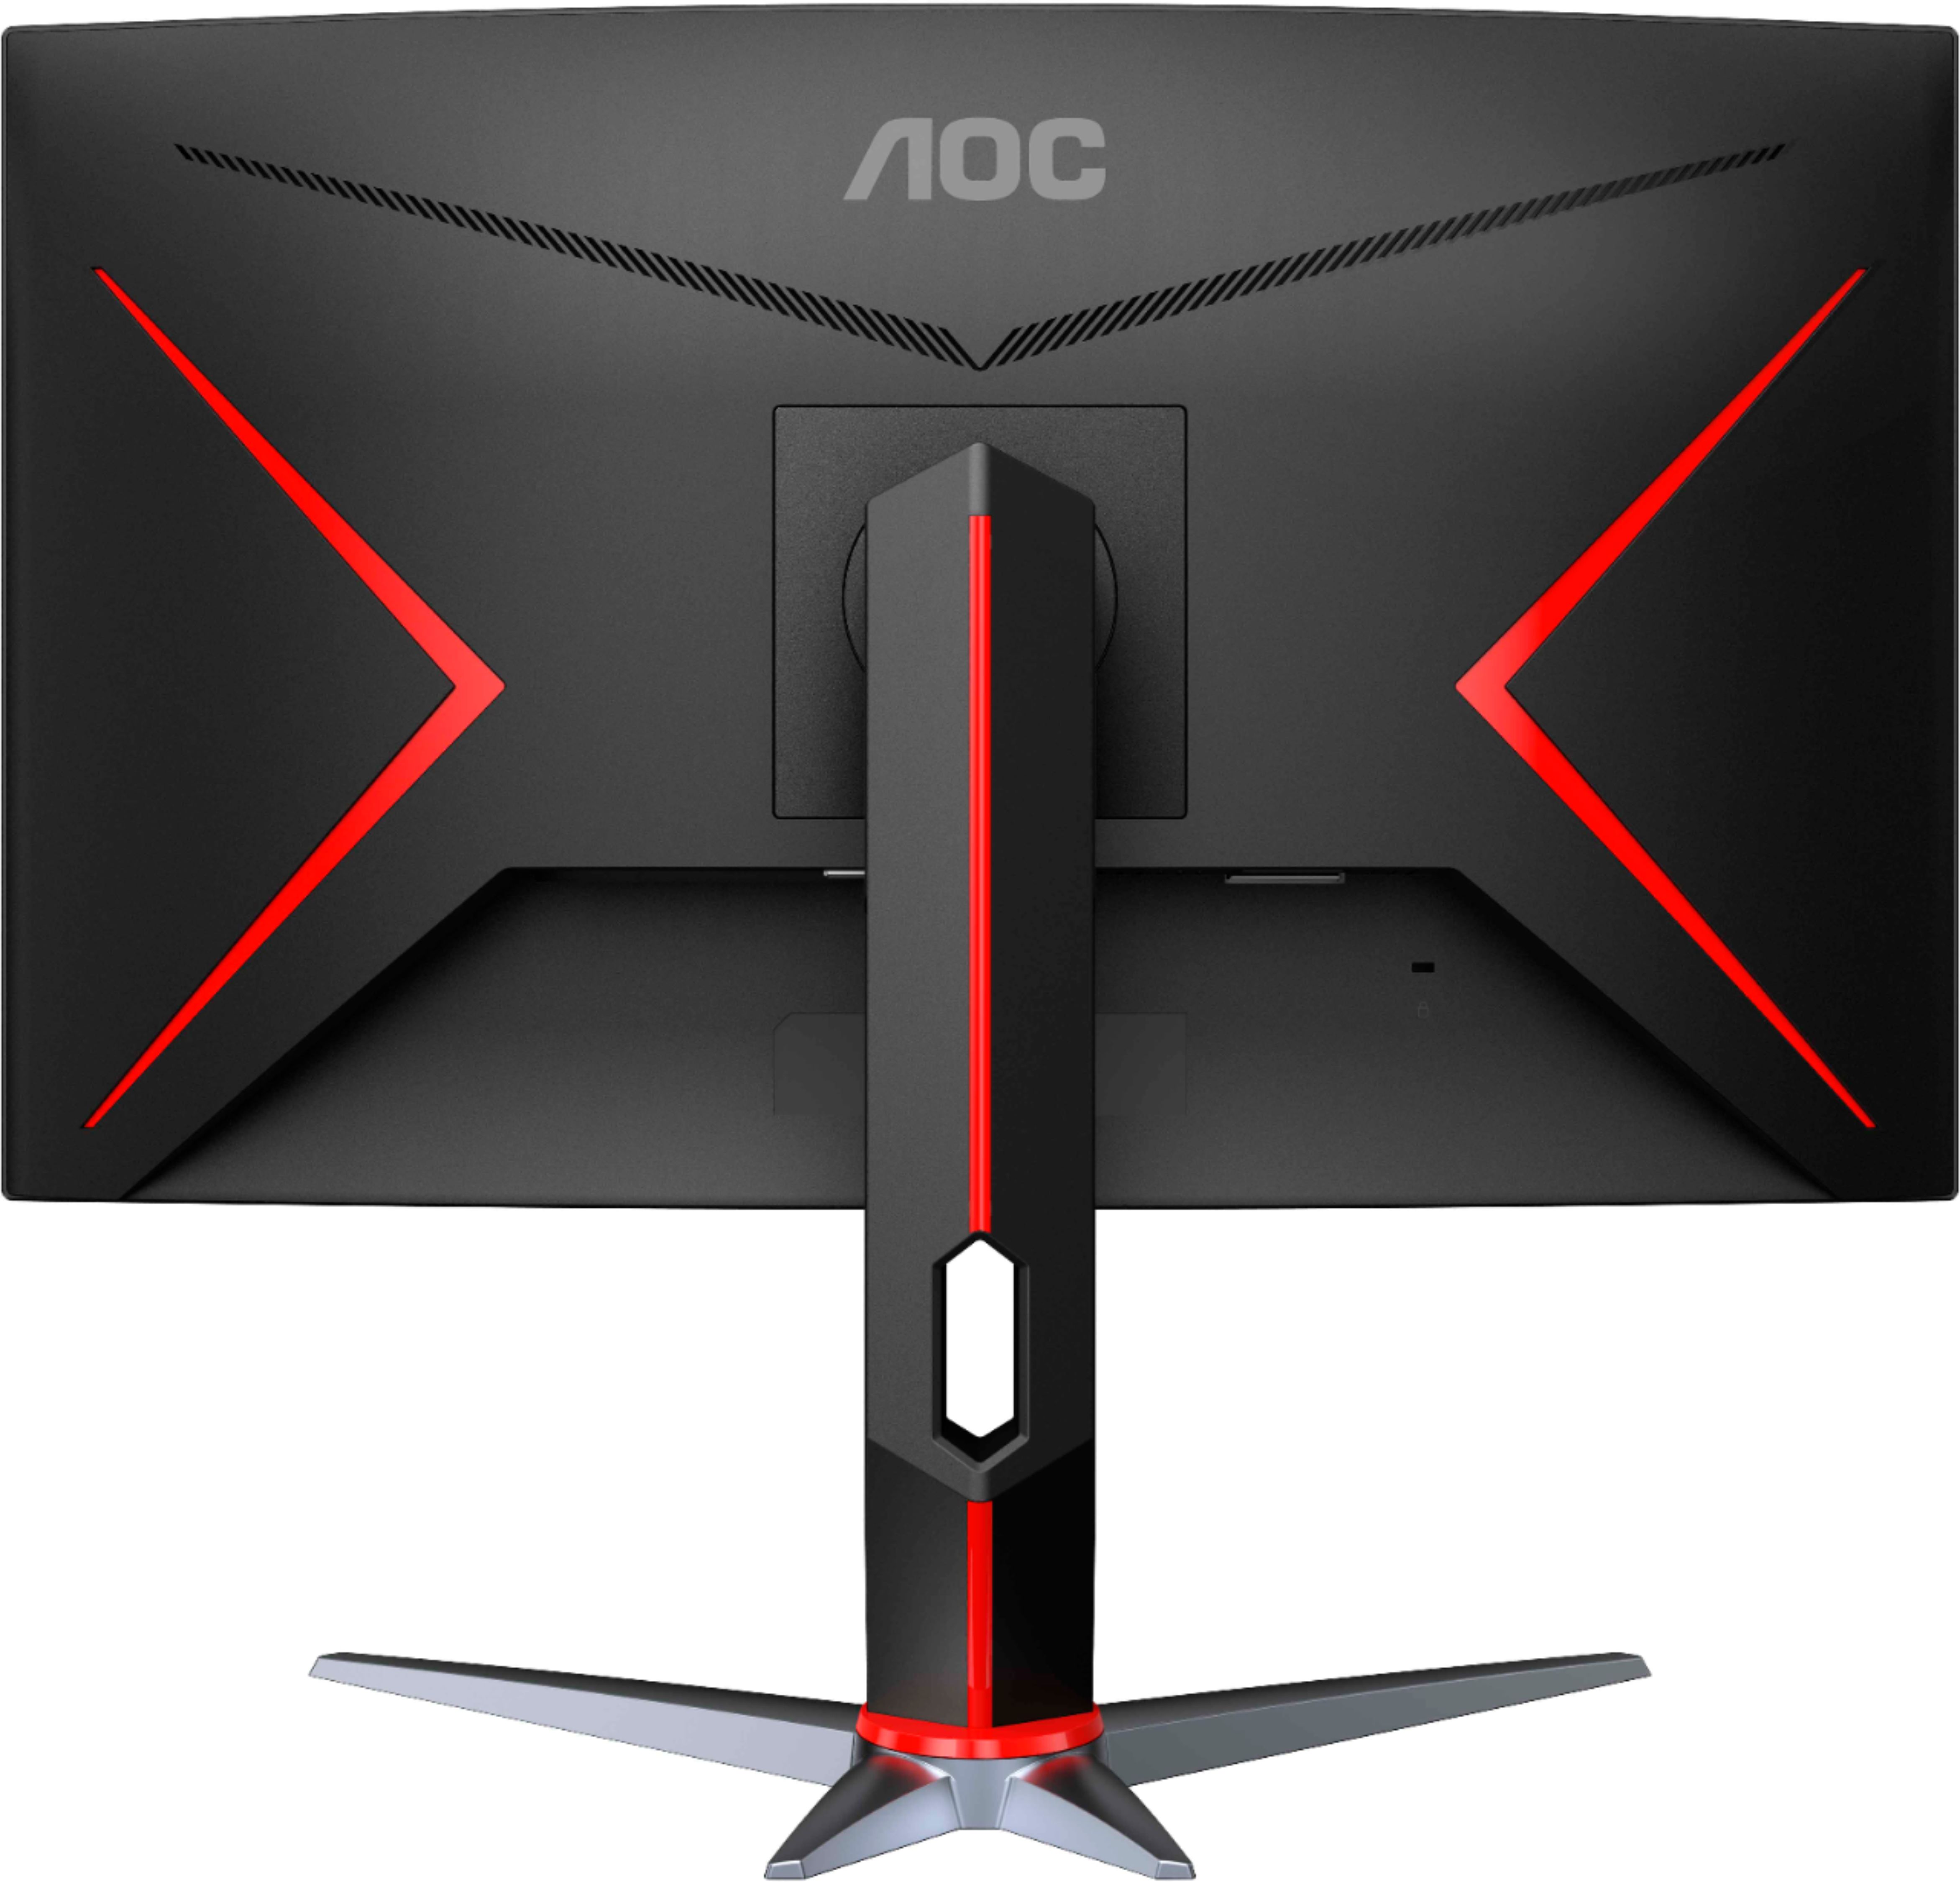 Back View: AOC - Geek Squad Certified Refurbished G2 Series 24" LED Curved FHD FreeSync Monitor - Black/Red